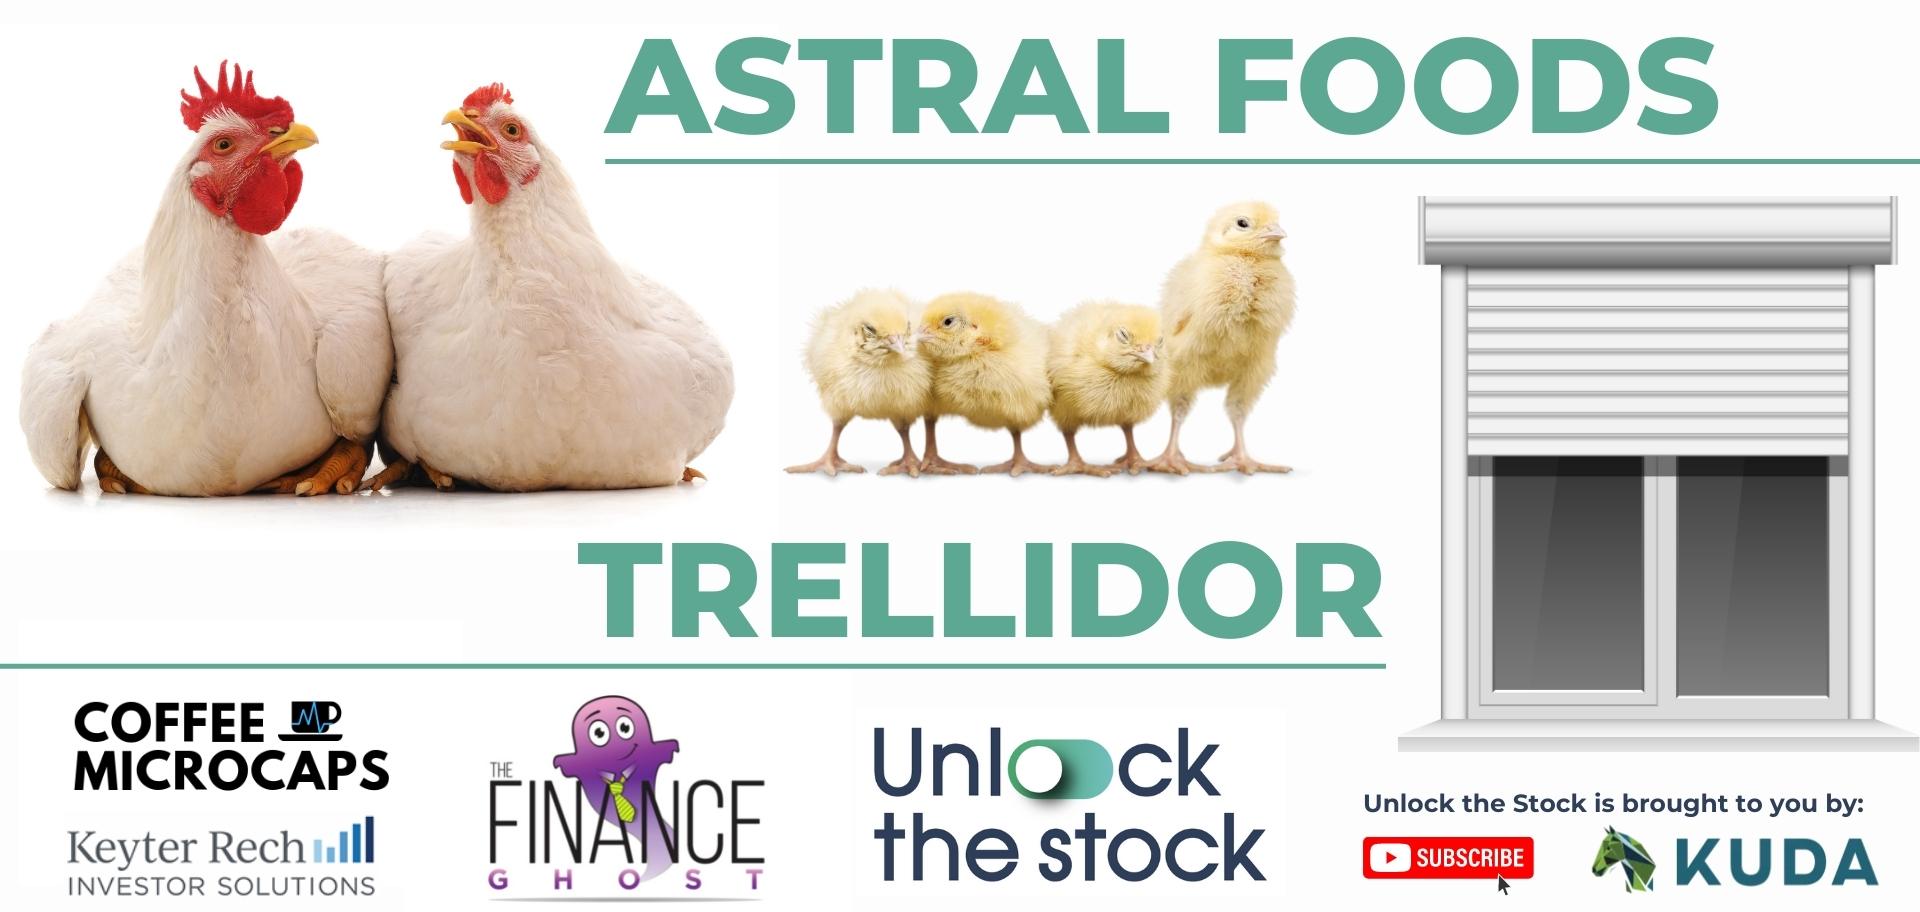 Unlock the Stock: Astral Foods and Trellidor